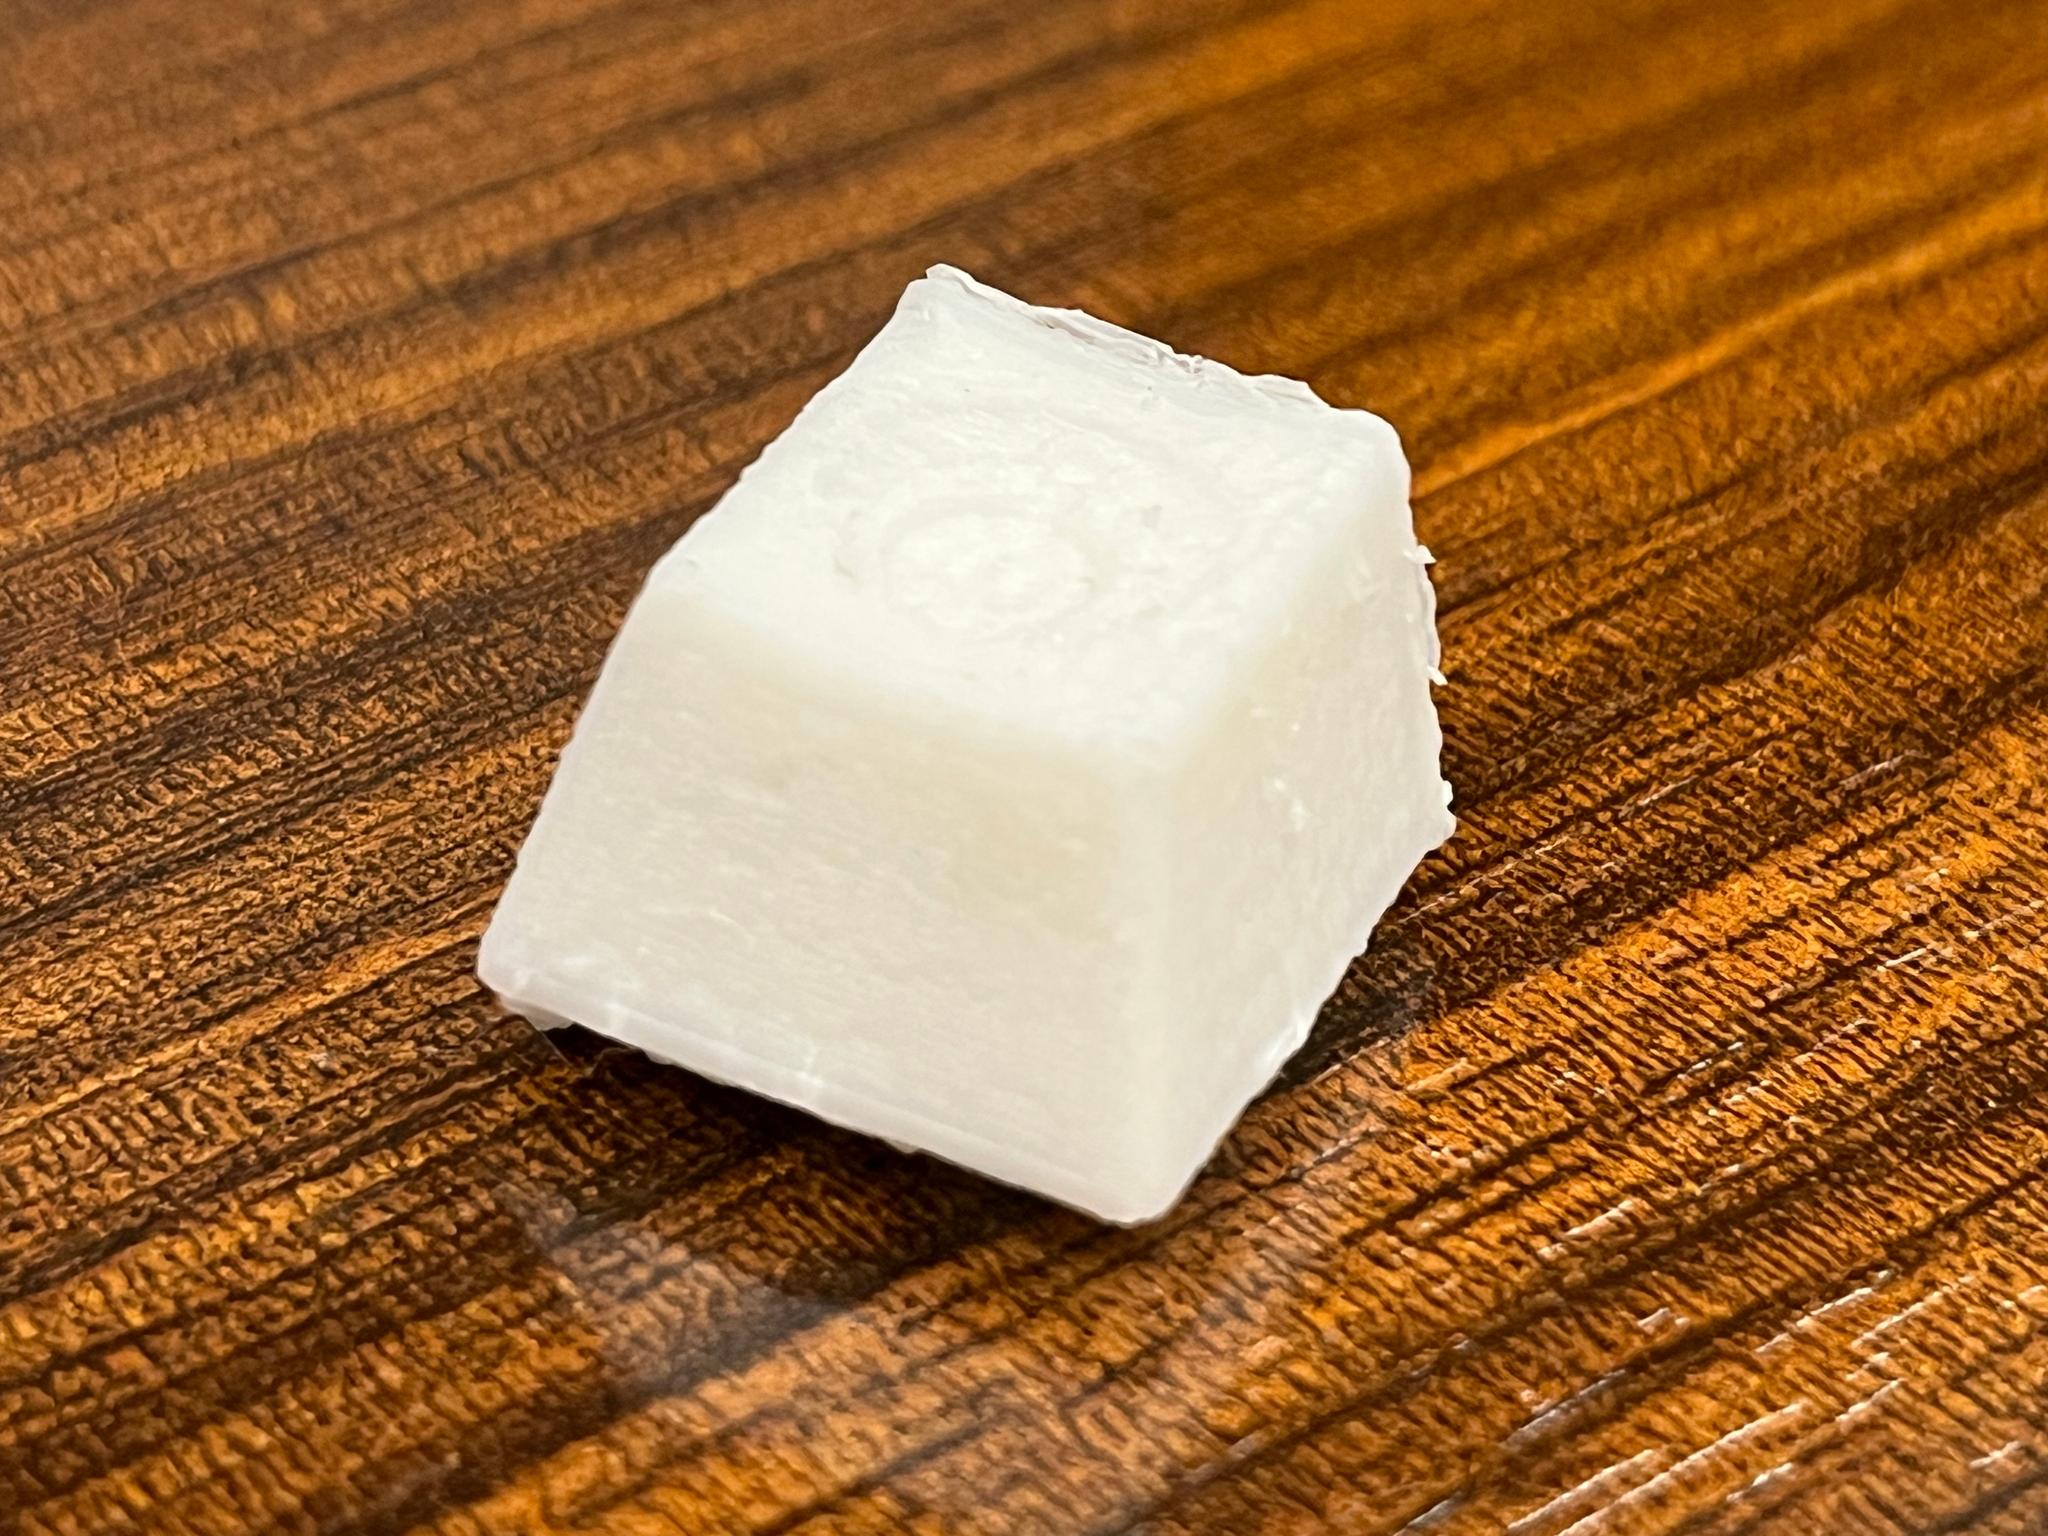 Top view of white Turkey Keycap printed with dremel